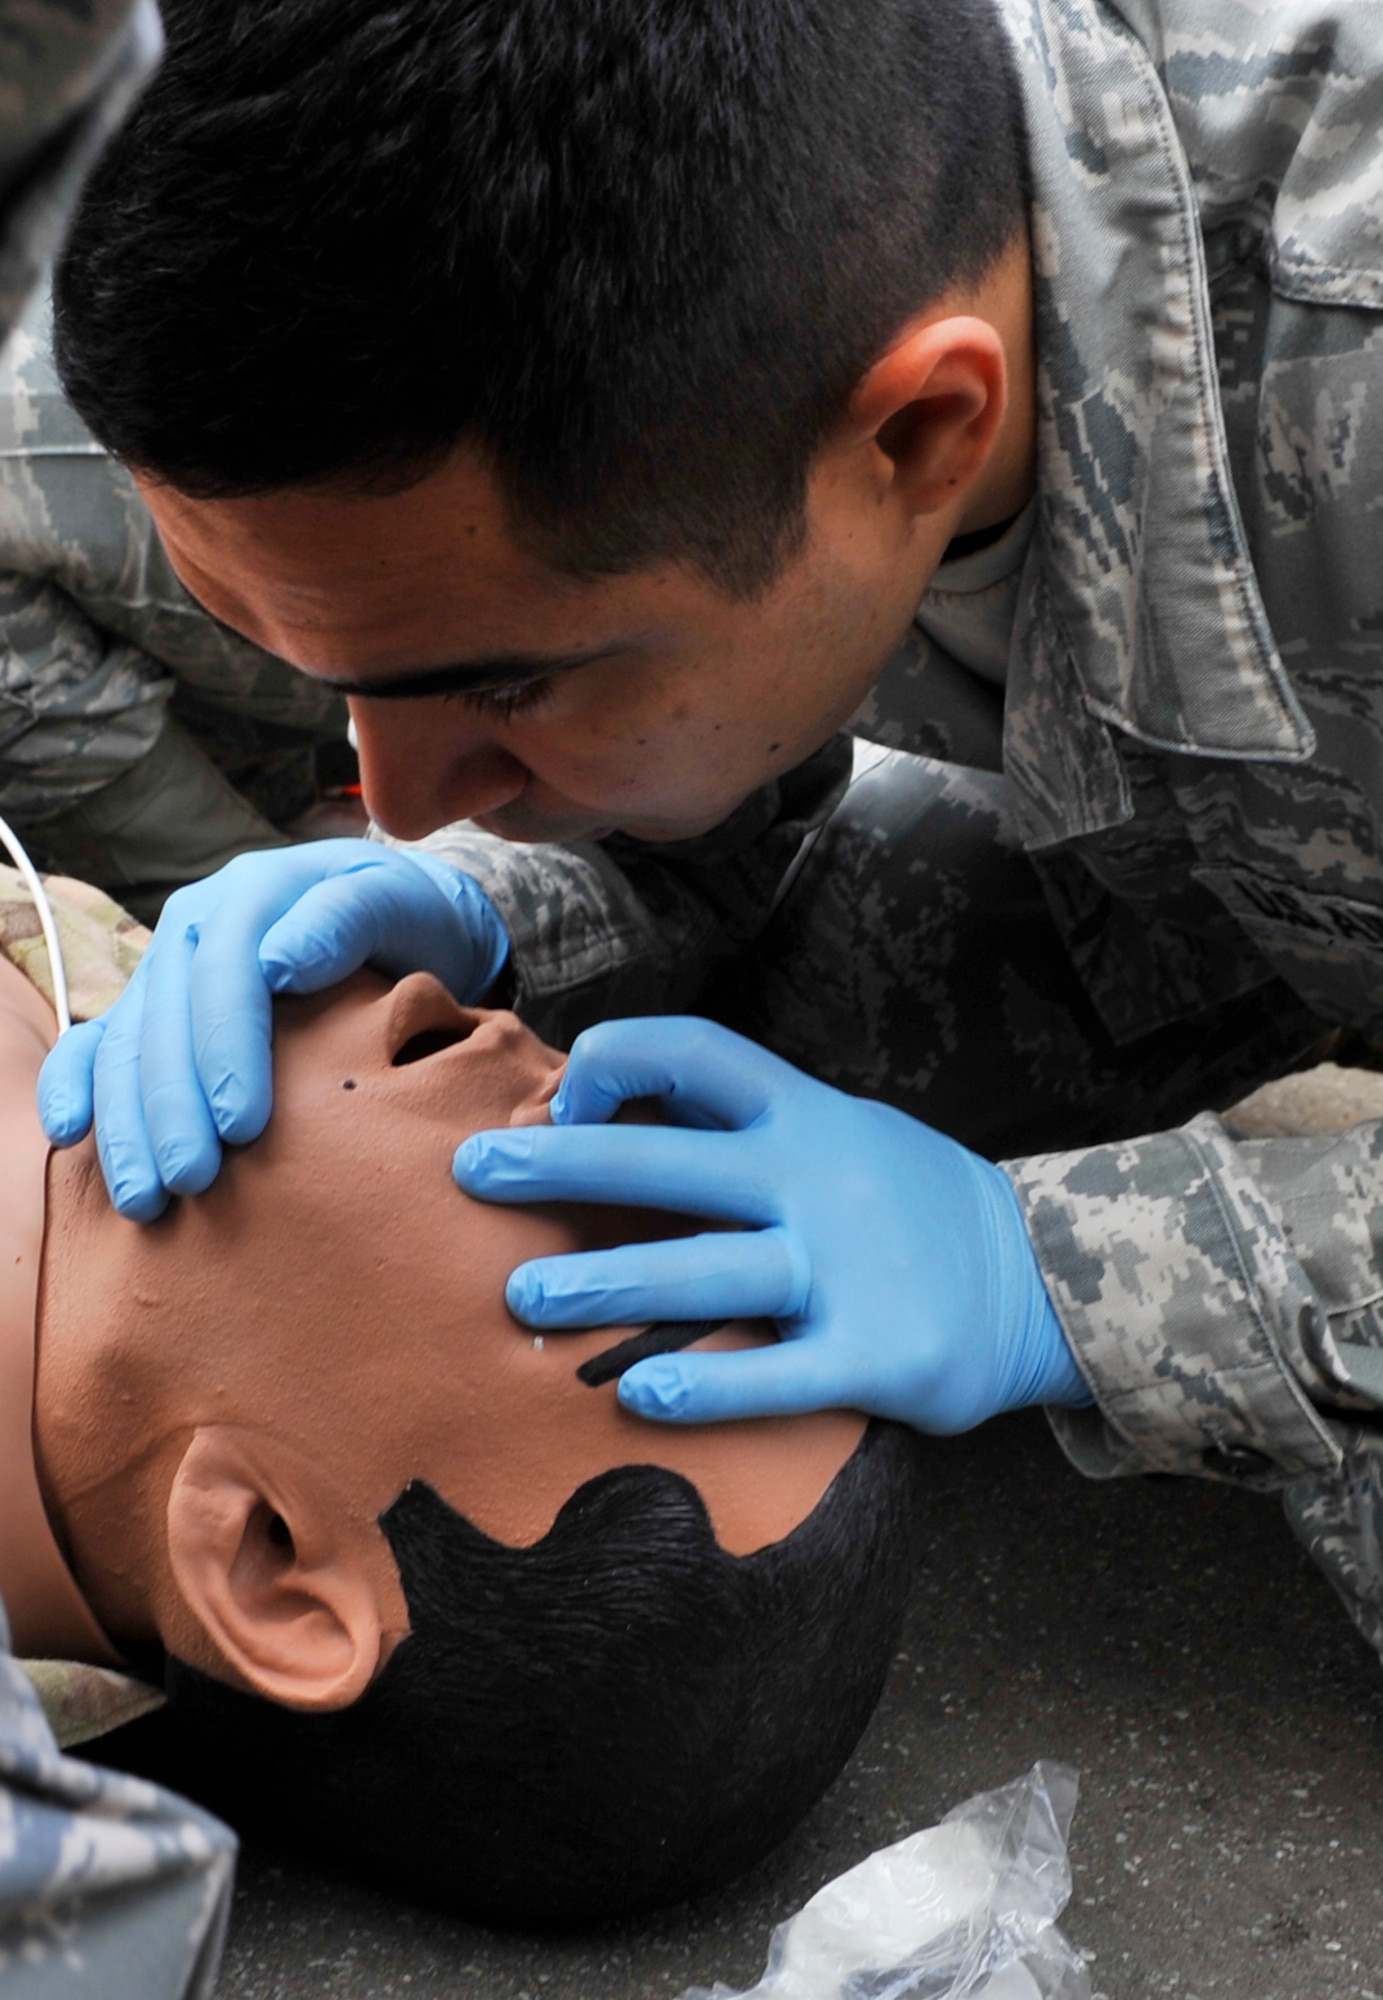 An Airmen demonstrates cardiopulmonary resuscitation during Expeditionary Medical Support training Aug. 28, 2013, Ramstein Air Base, Germany. EMEDS training is conducted to prepare Airmen for humanitarian missions. (U.S. Air Force photo/Airman Dymekre Allen)